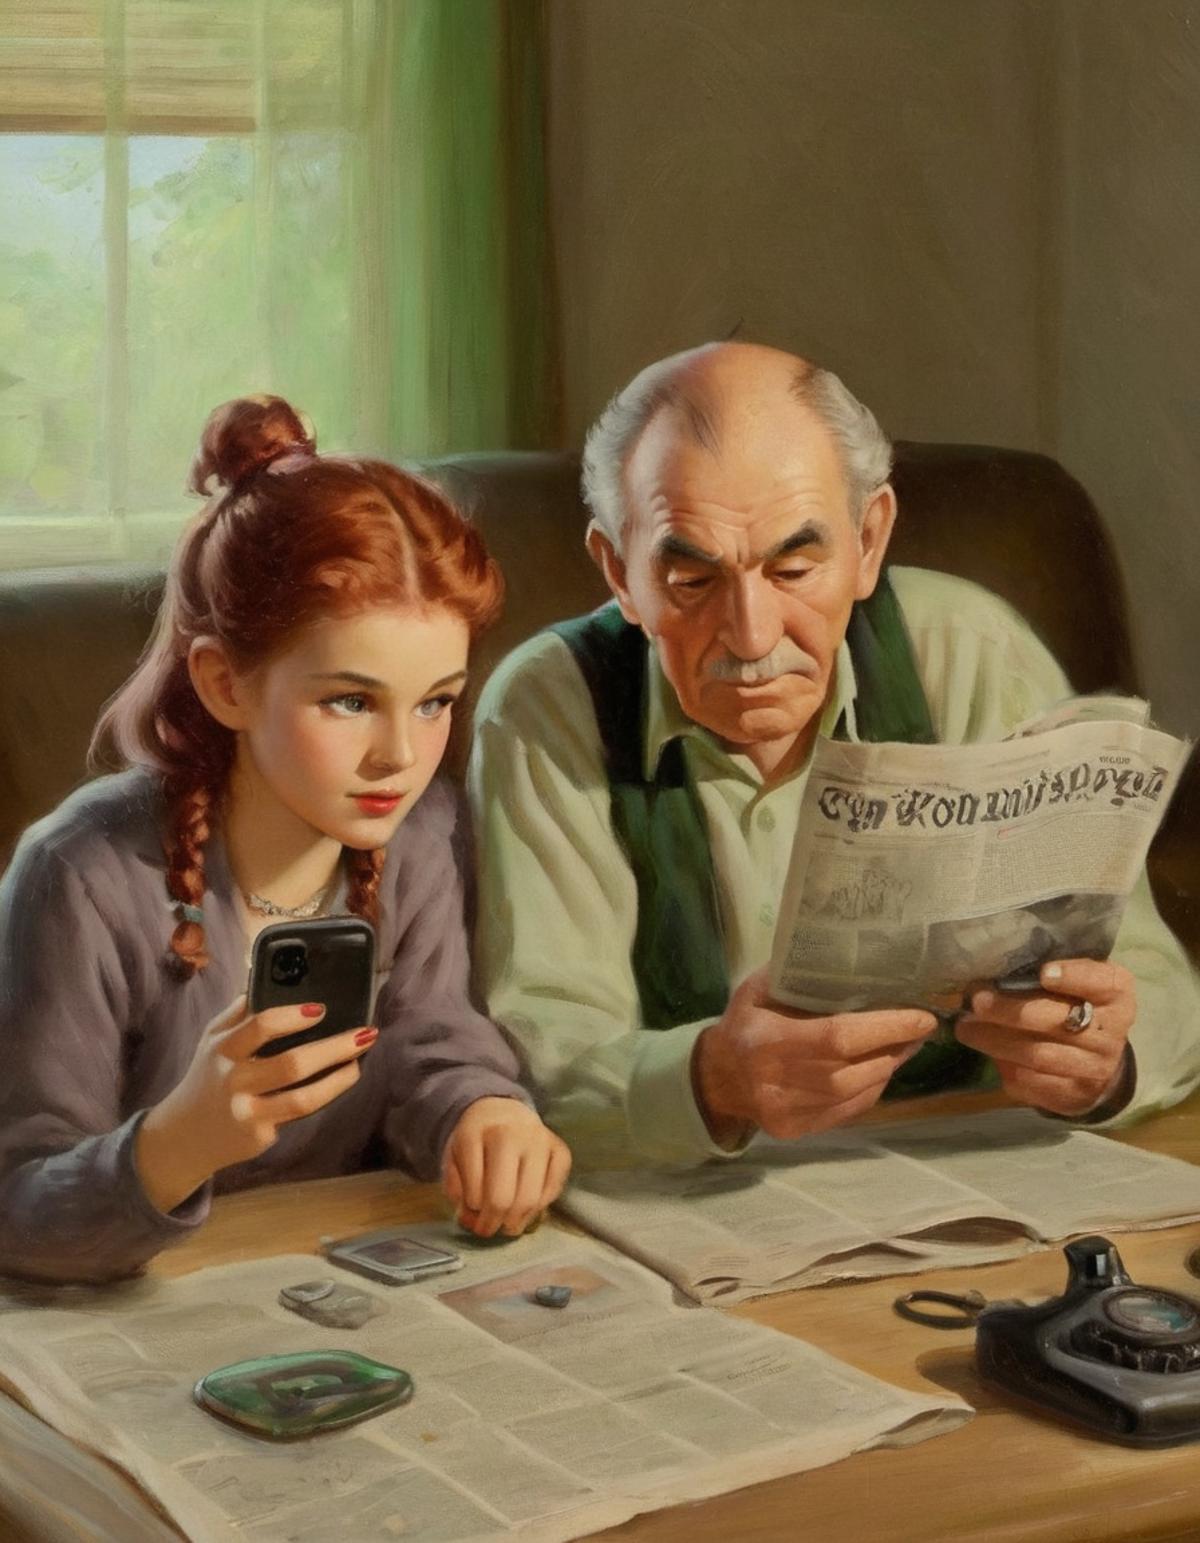 Painting of an older man and a young girl sitting together on a couch, the older man is reading a newspaper and the girl is looking at her phone.